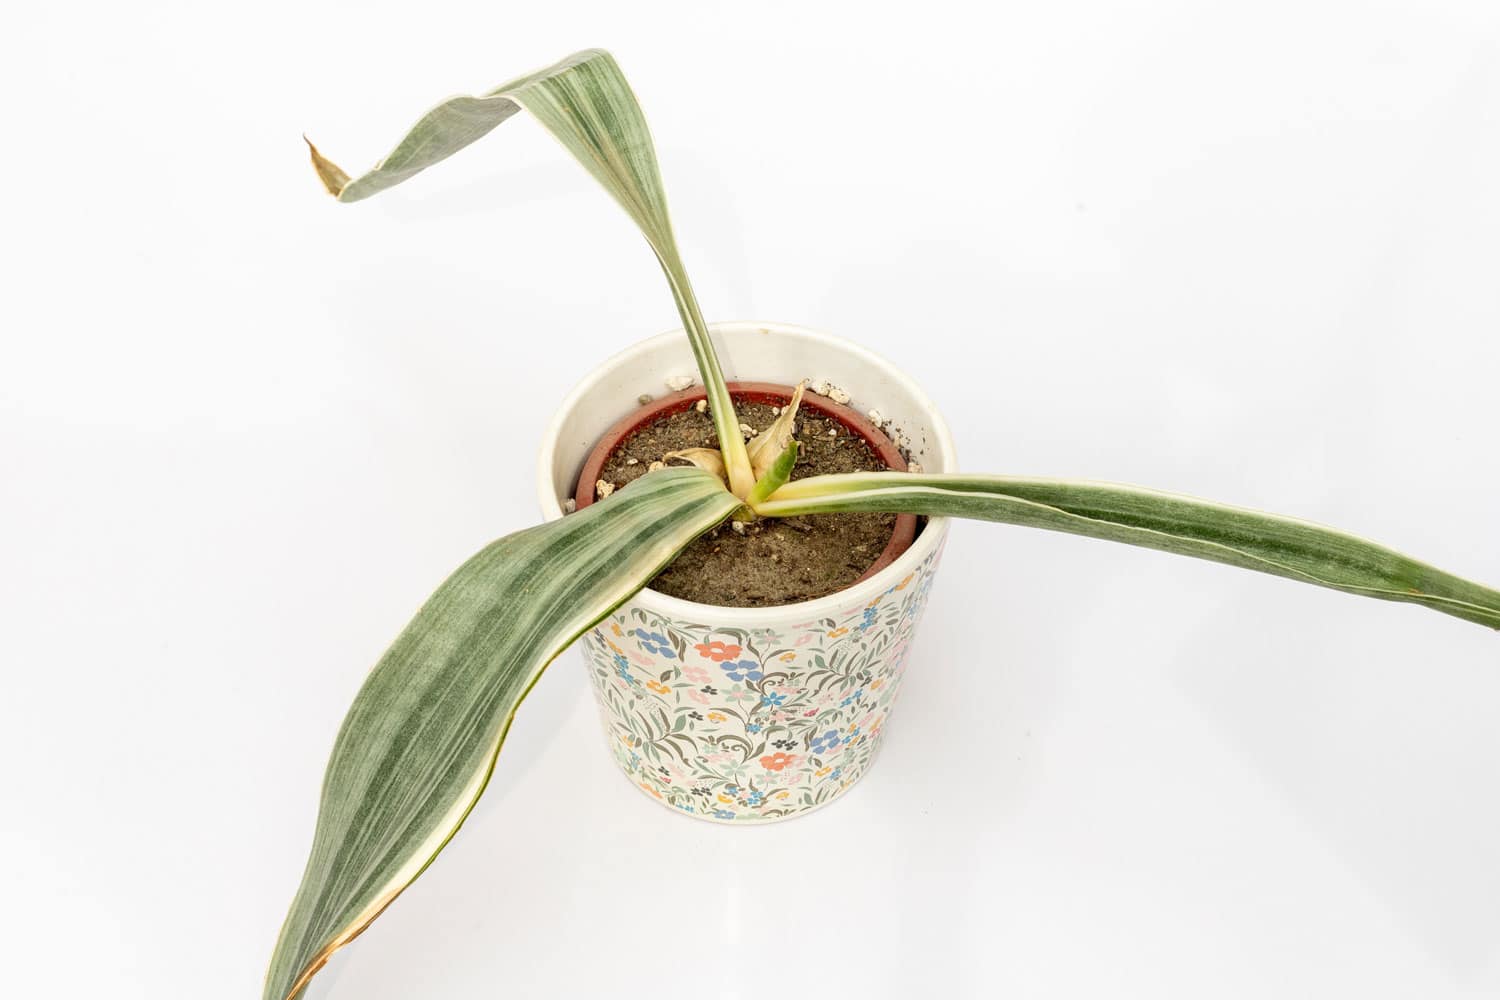 A snake plant infested with a disease